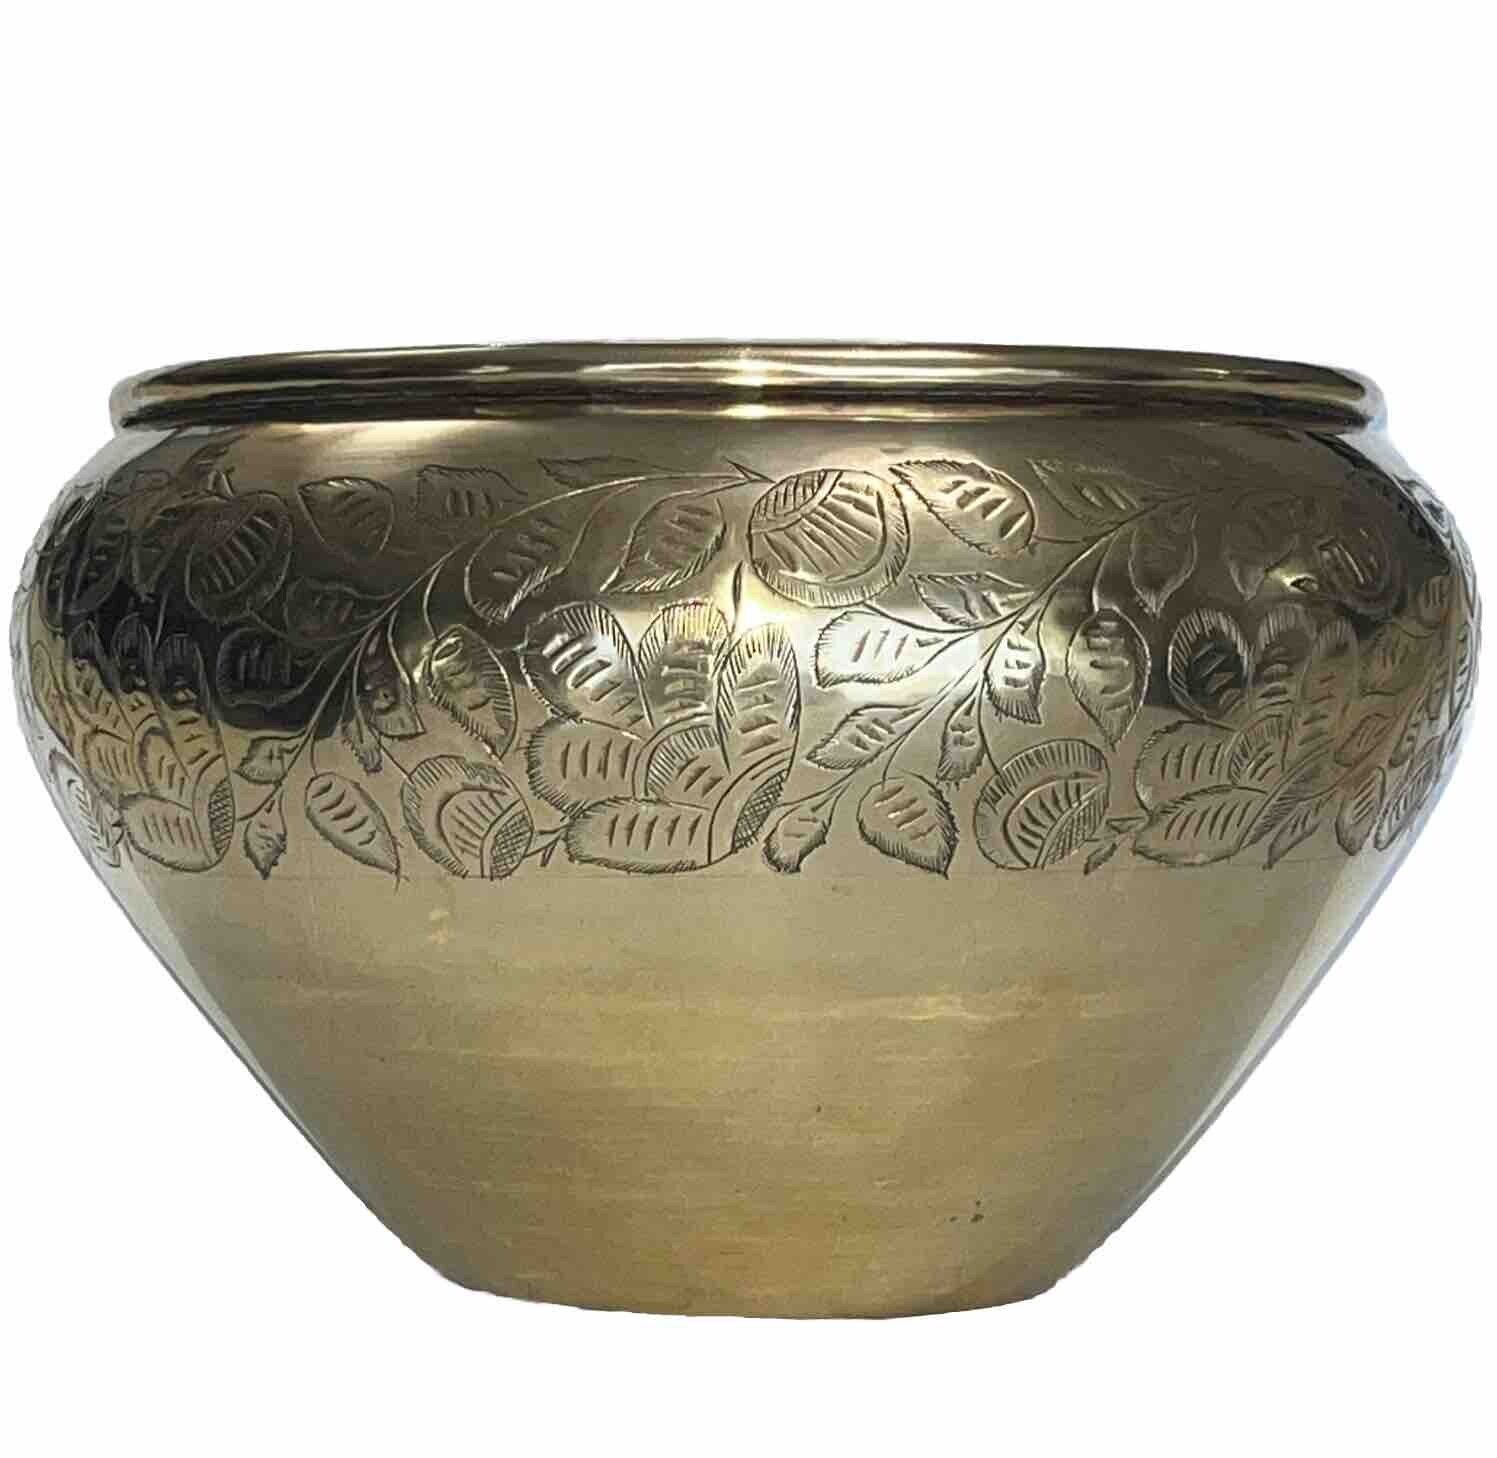 Solid Brass Bowl Hand Etched 6.5” Tall 9” Opening 10.5” Dia At Widest Vtg India